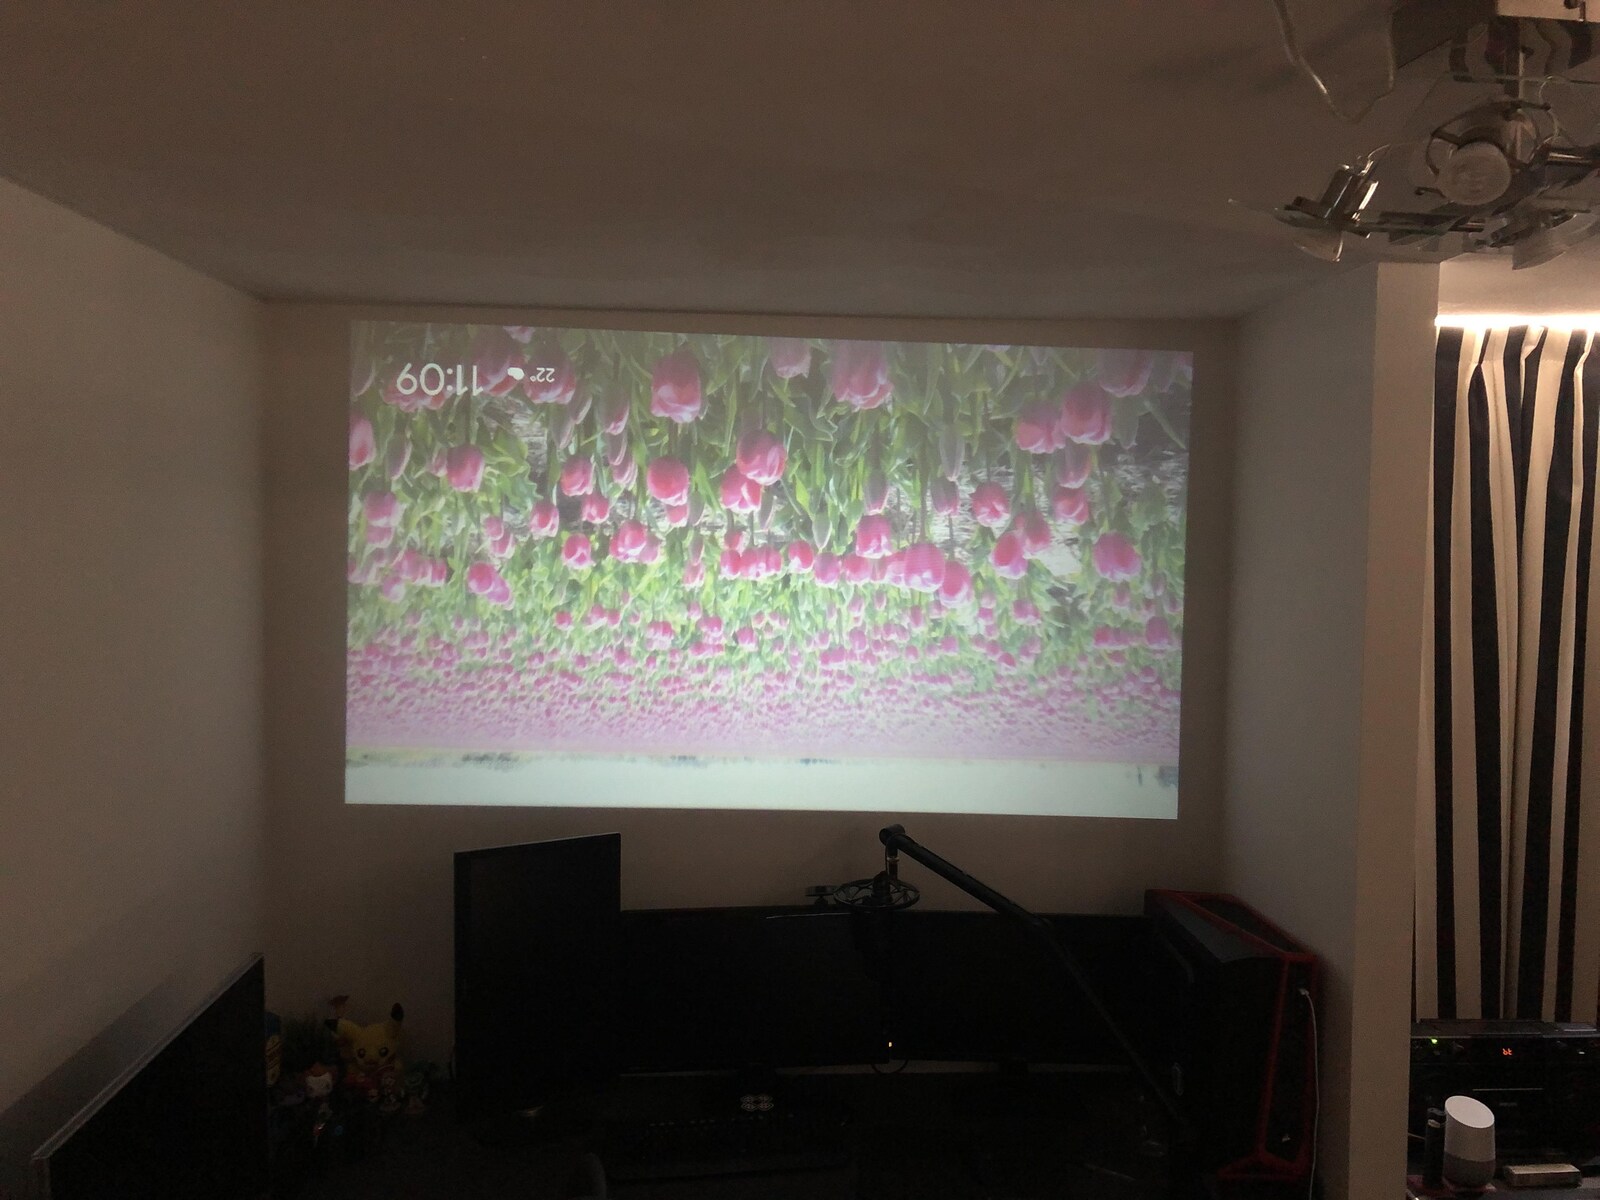 How To Flip A Projector Image